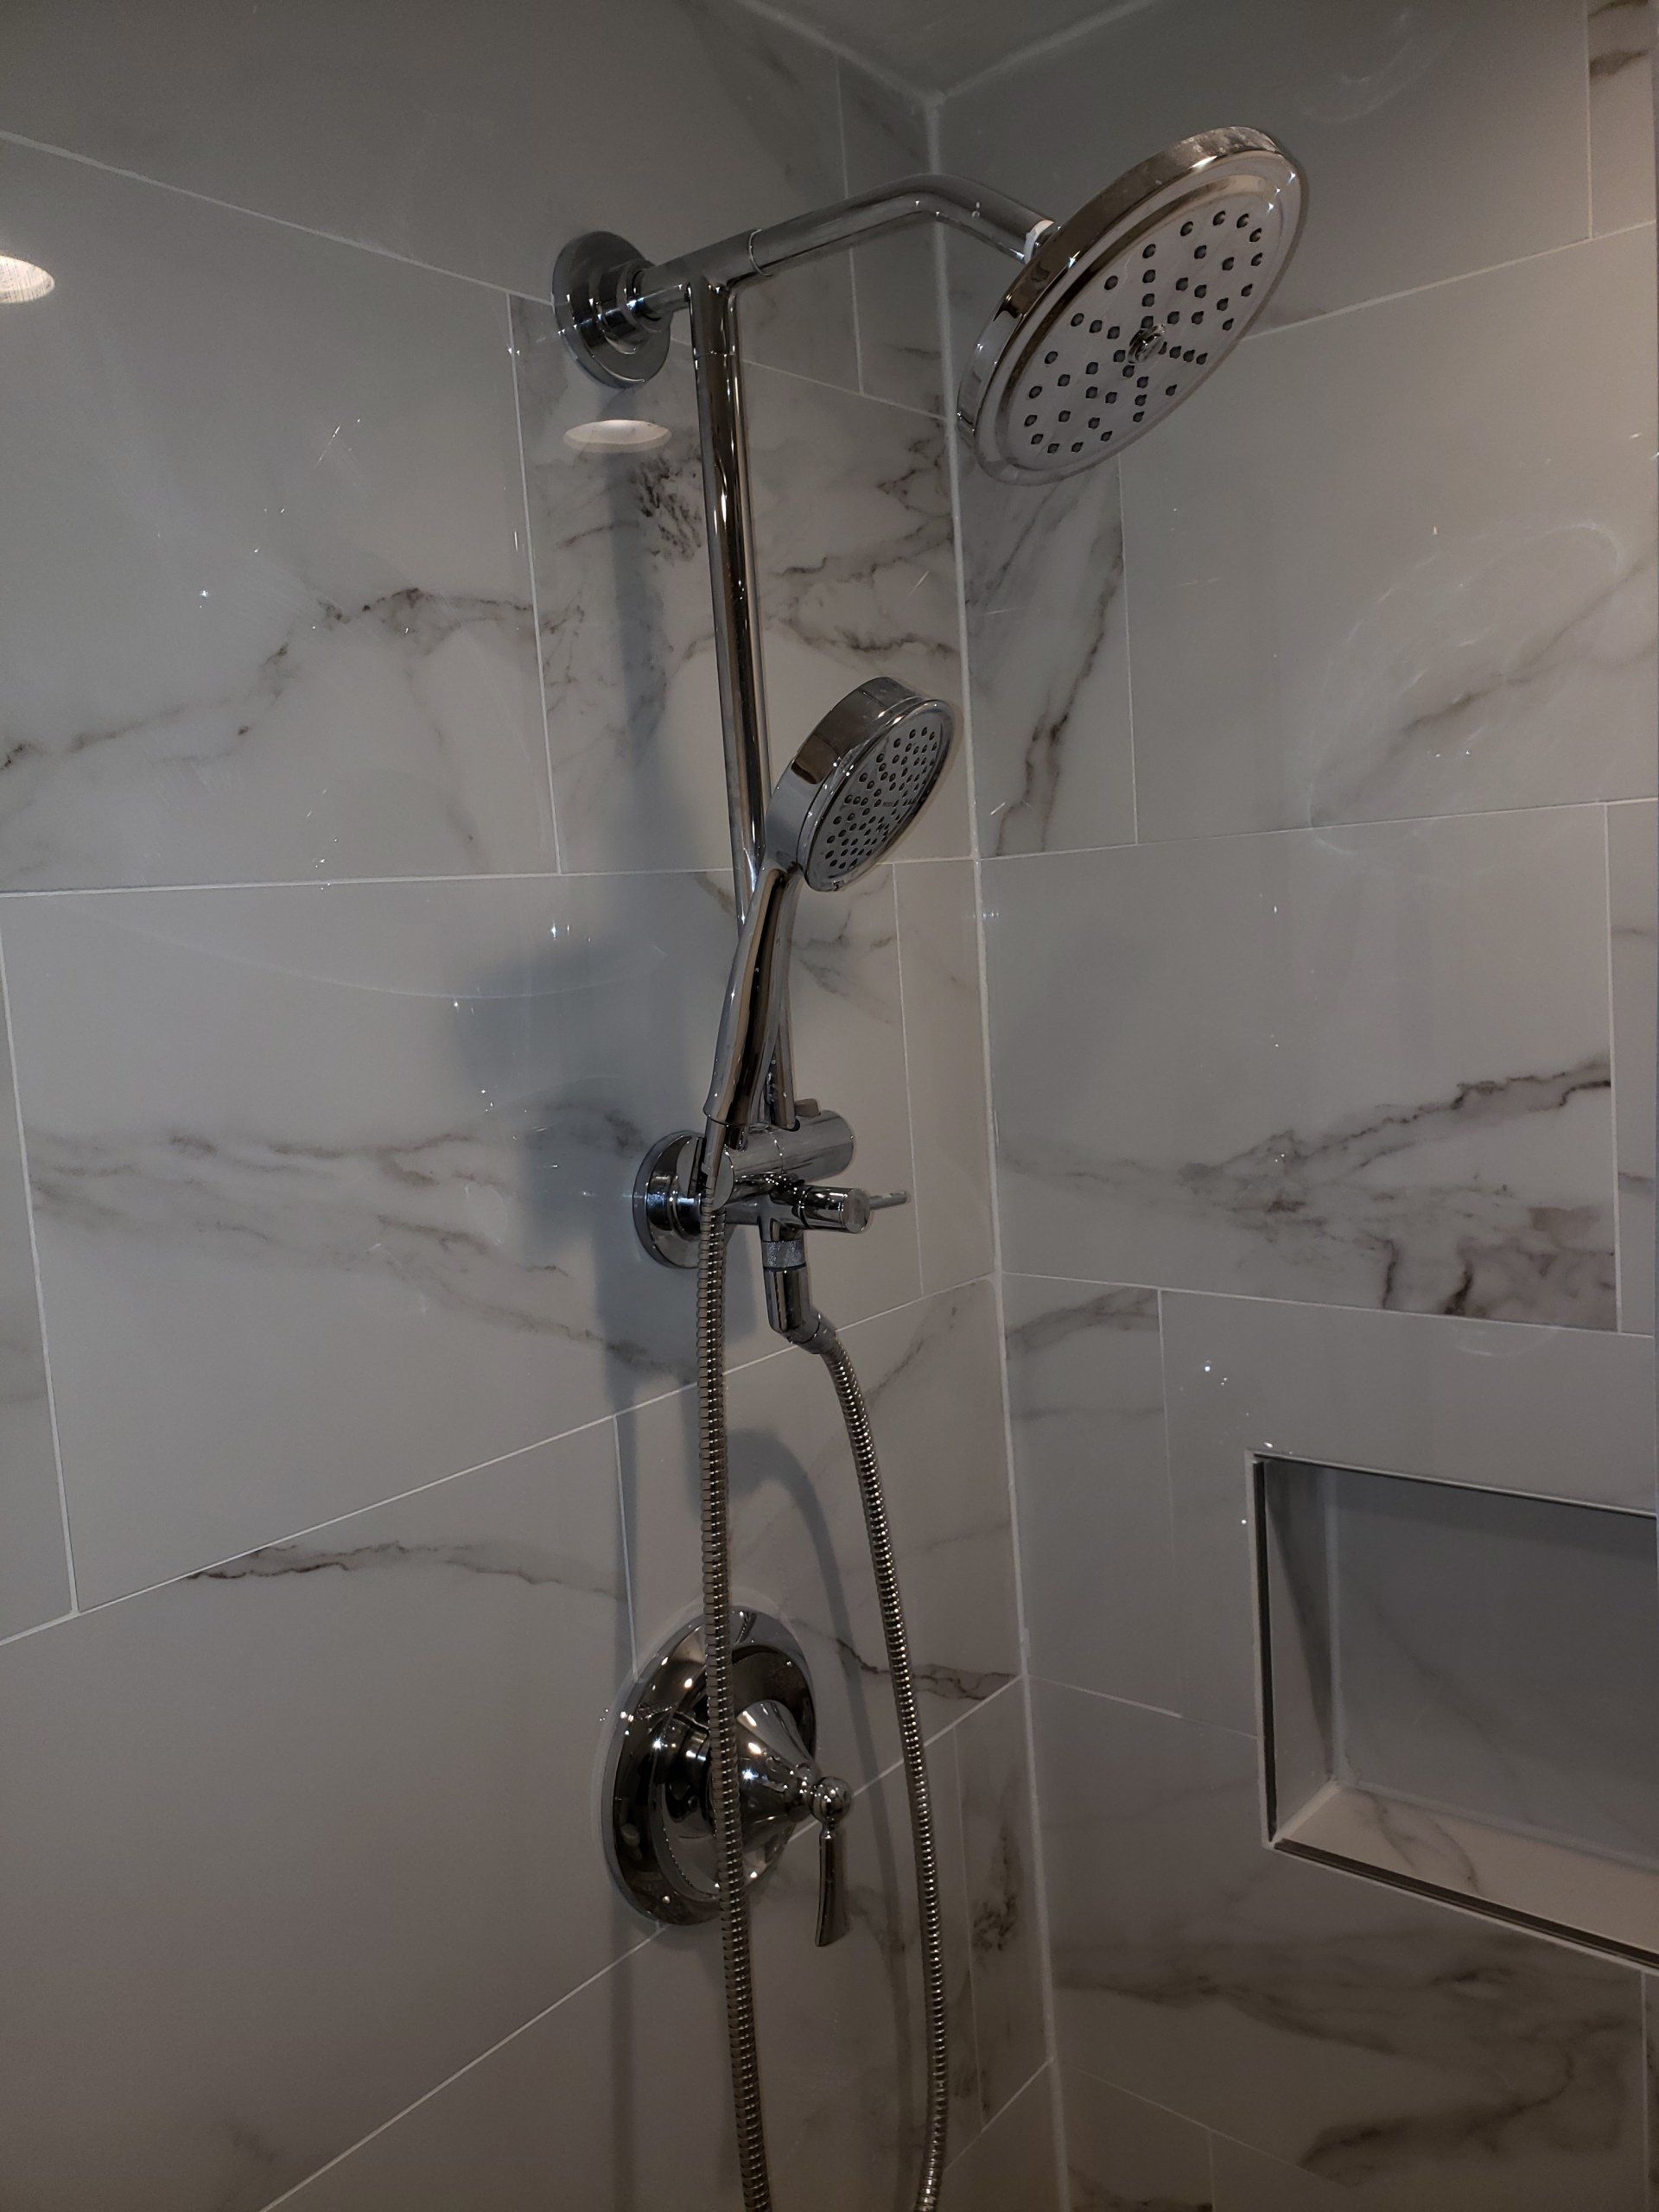 Dual shower head with removable lower head in Jenkintown bathroom remodel